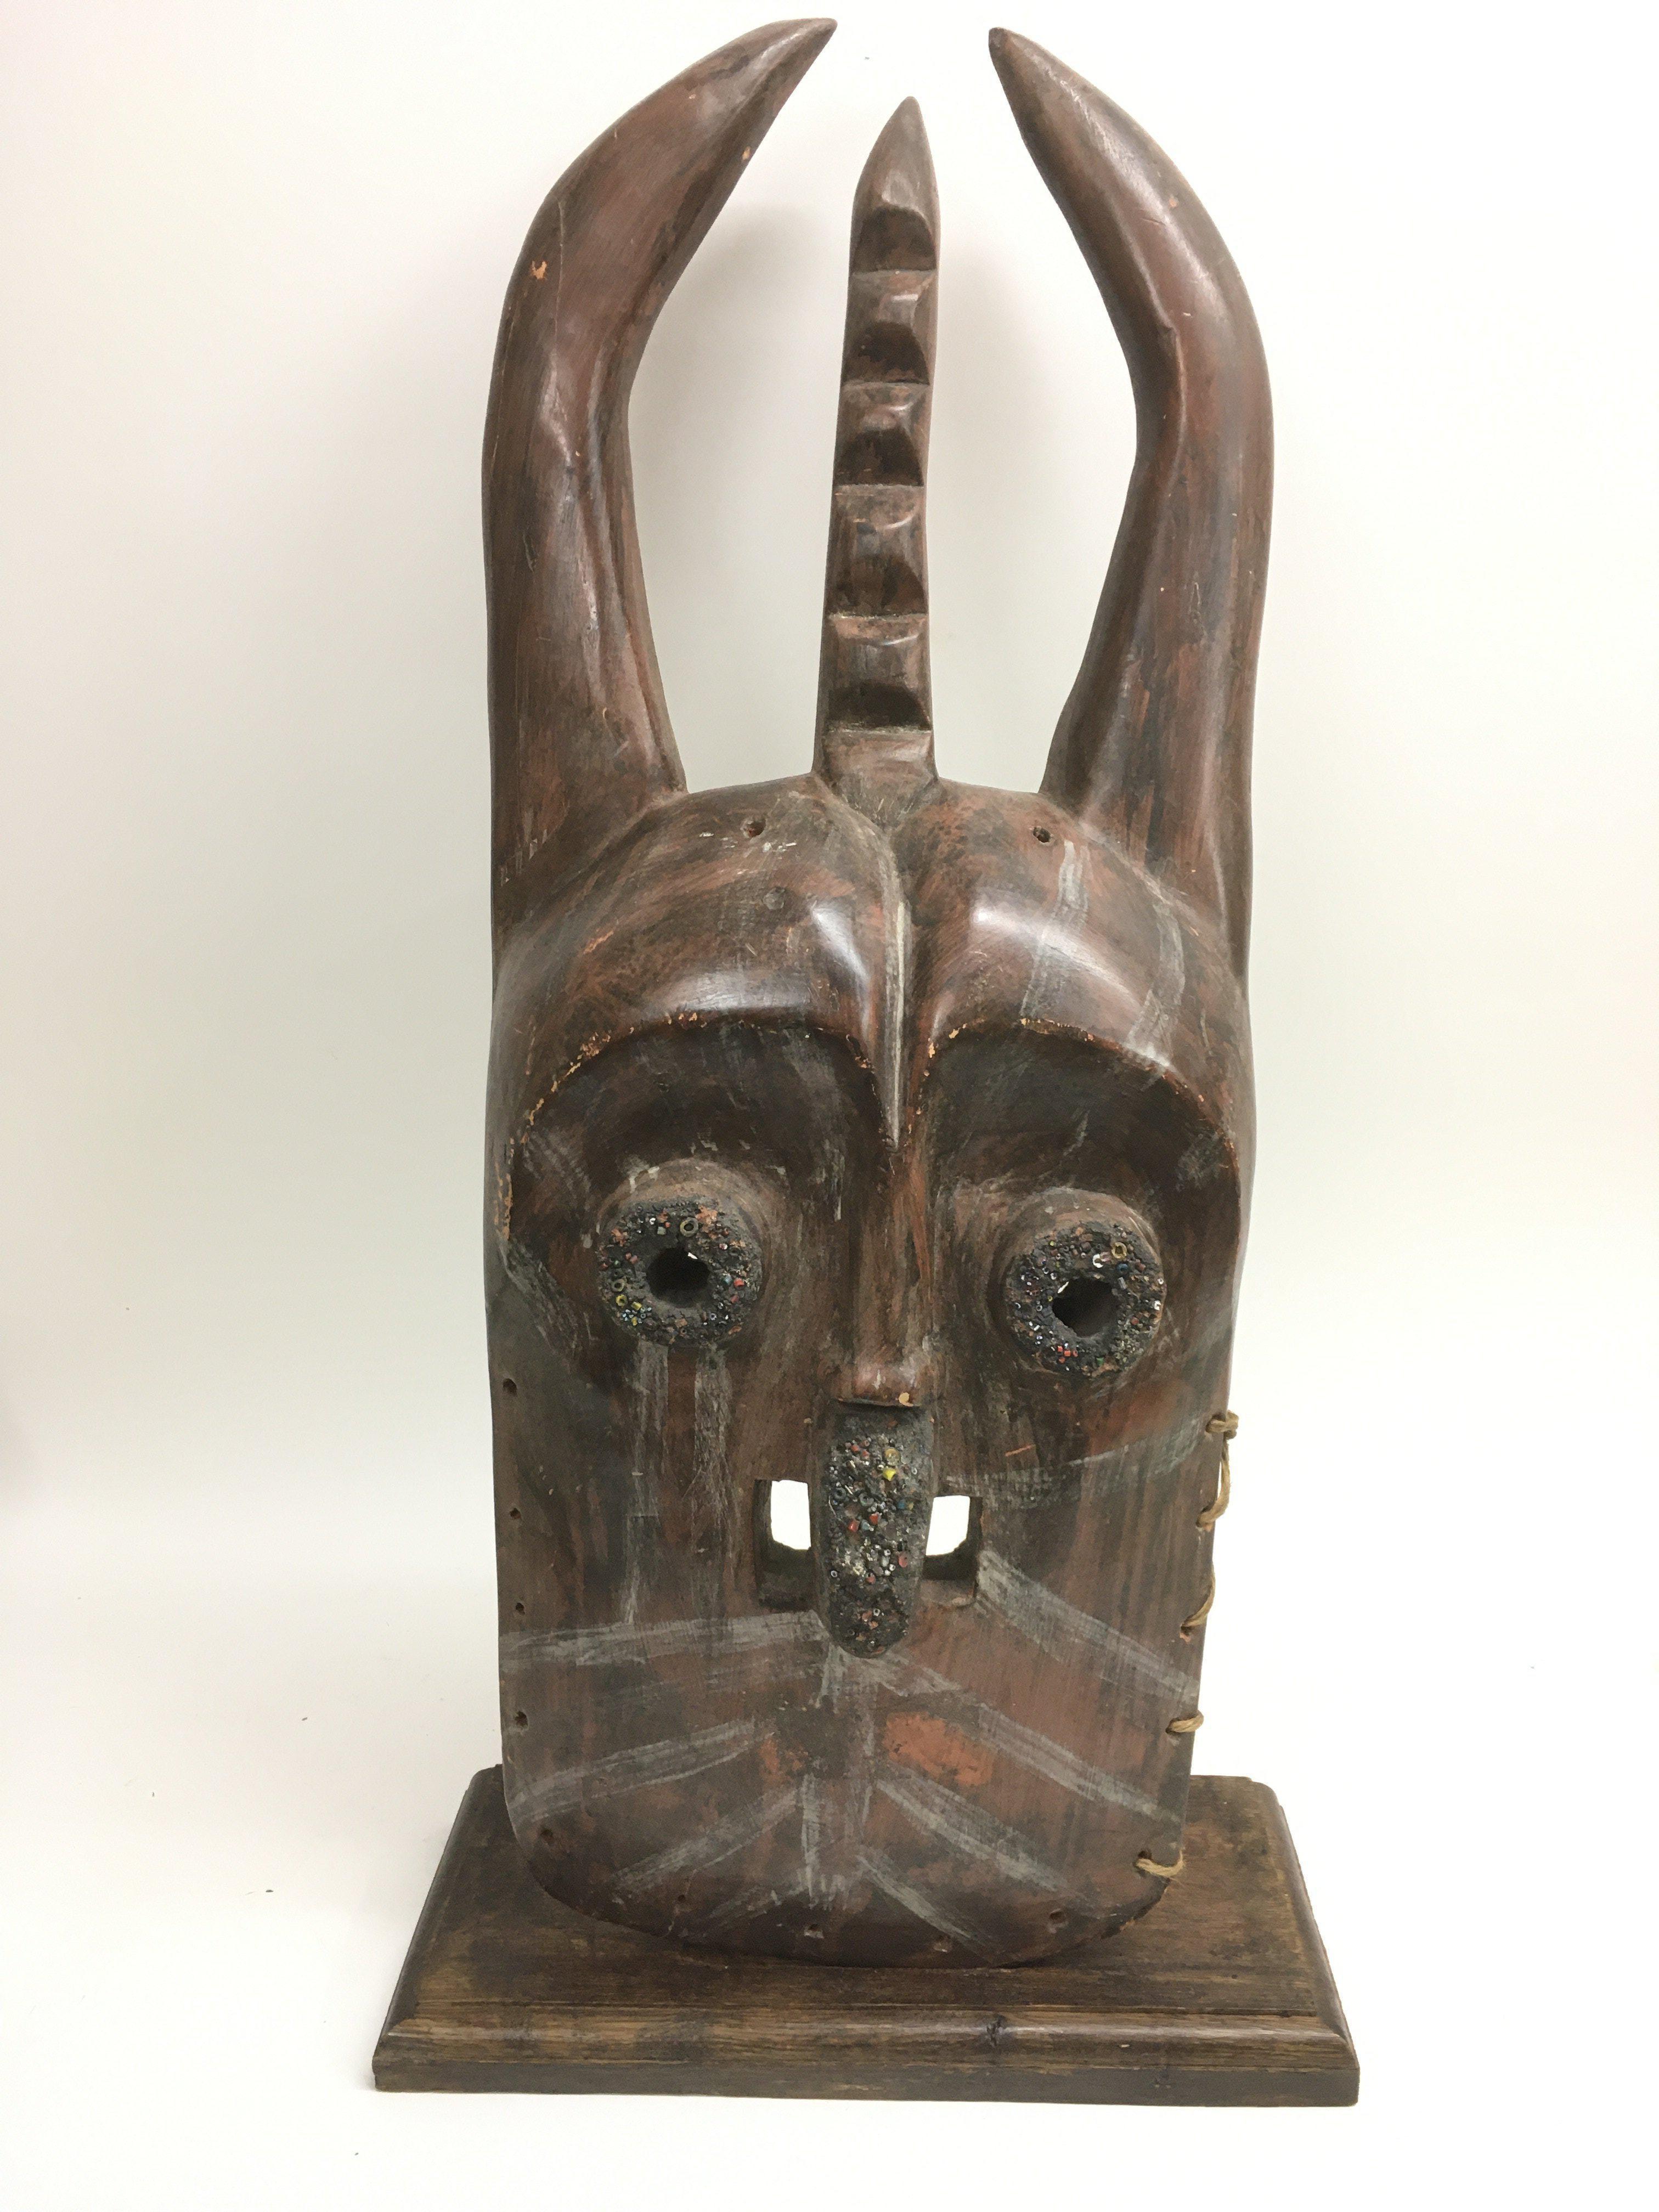 A large wooden tribal mask inset with glass trader